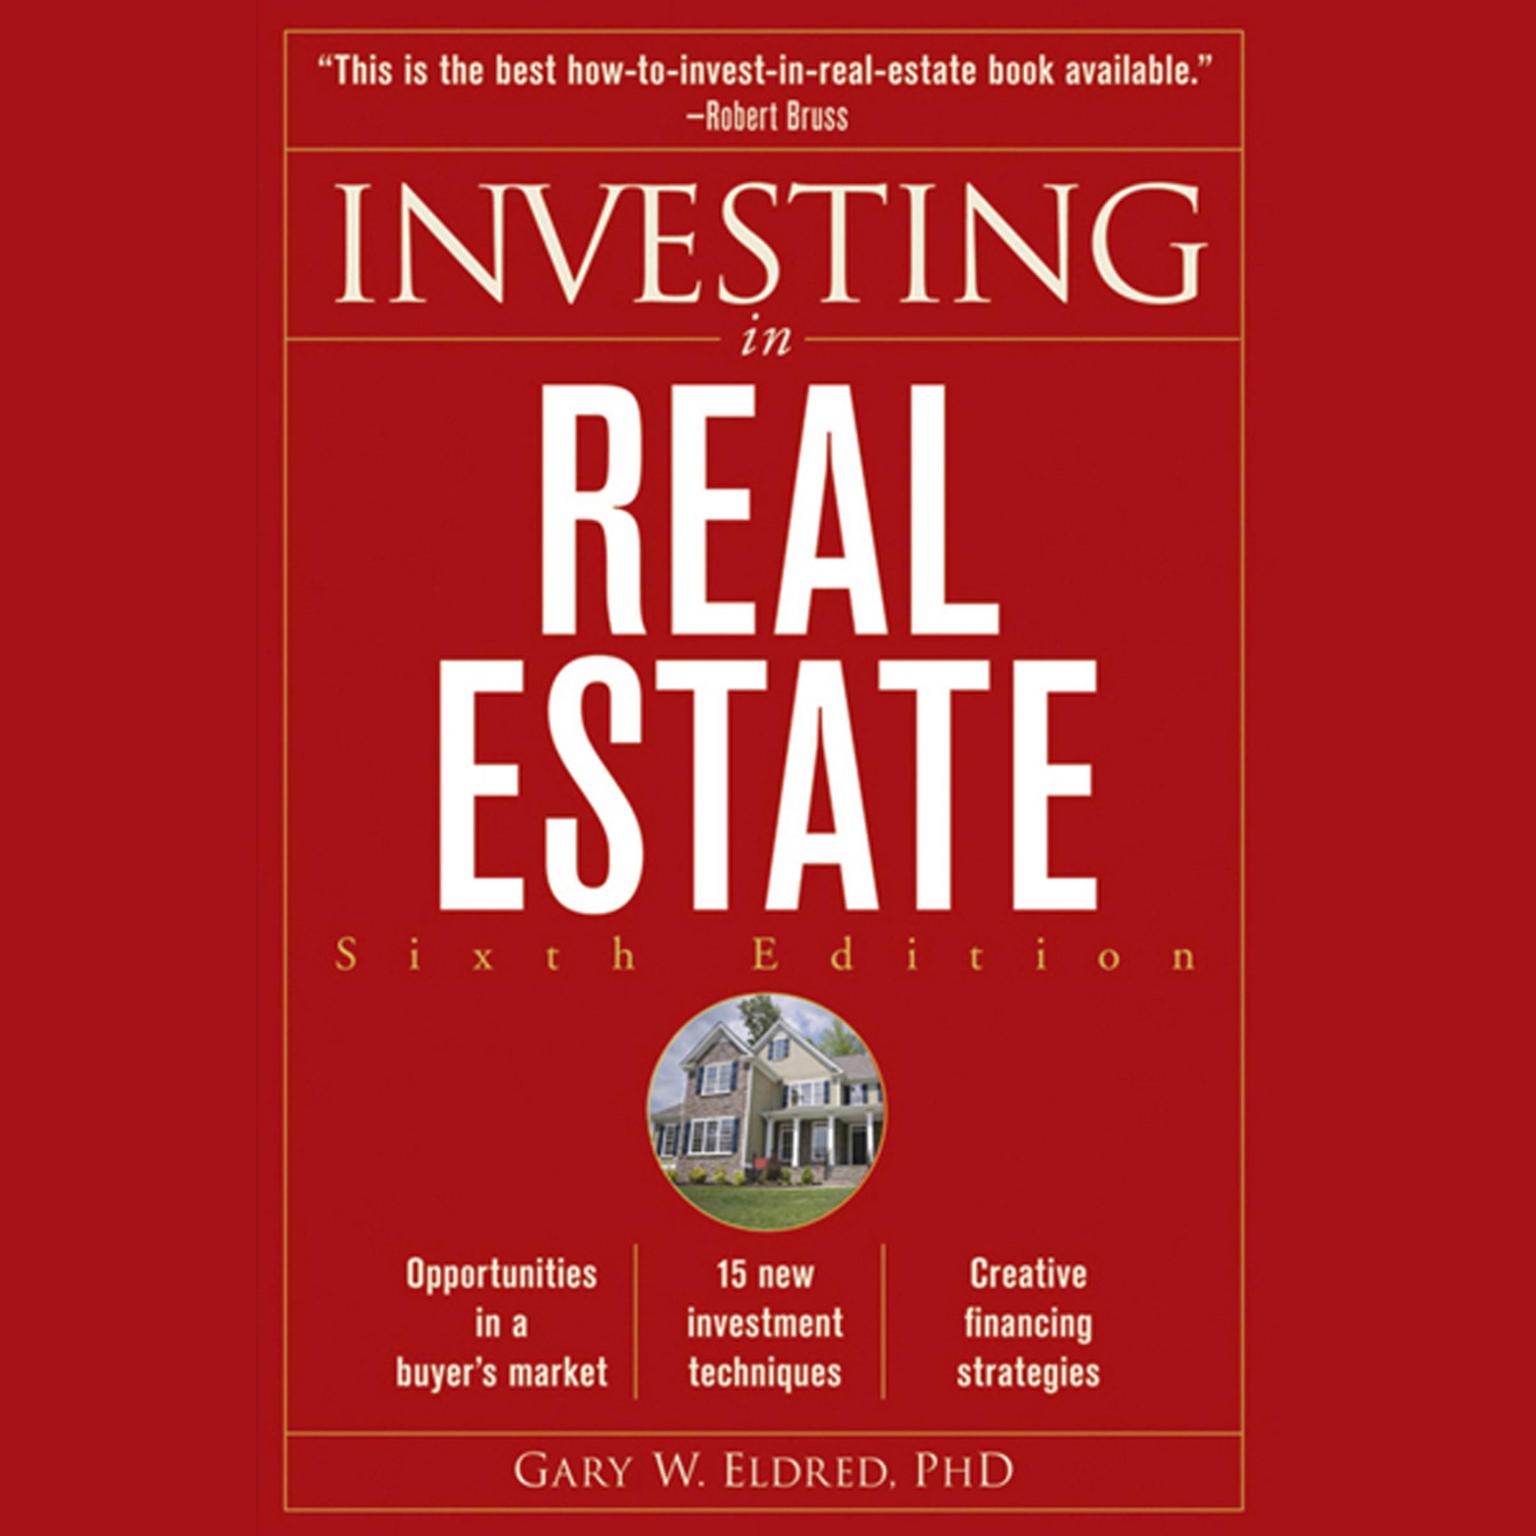 Investing in Real Estate, 6th Edition Audiobook, by Gary W. Eldred